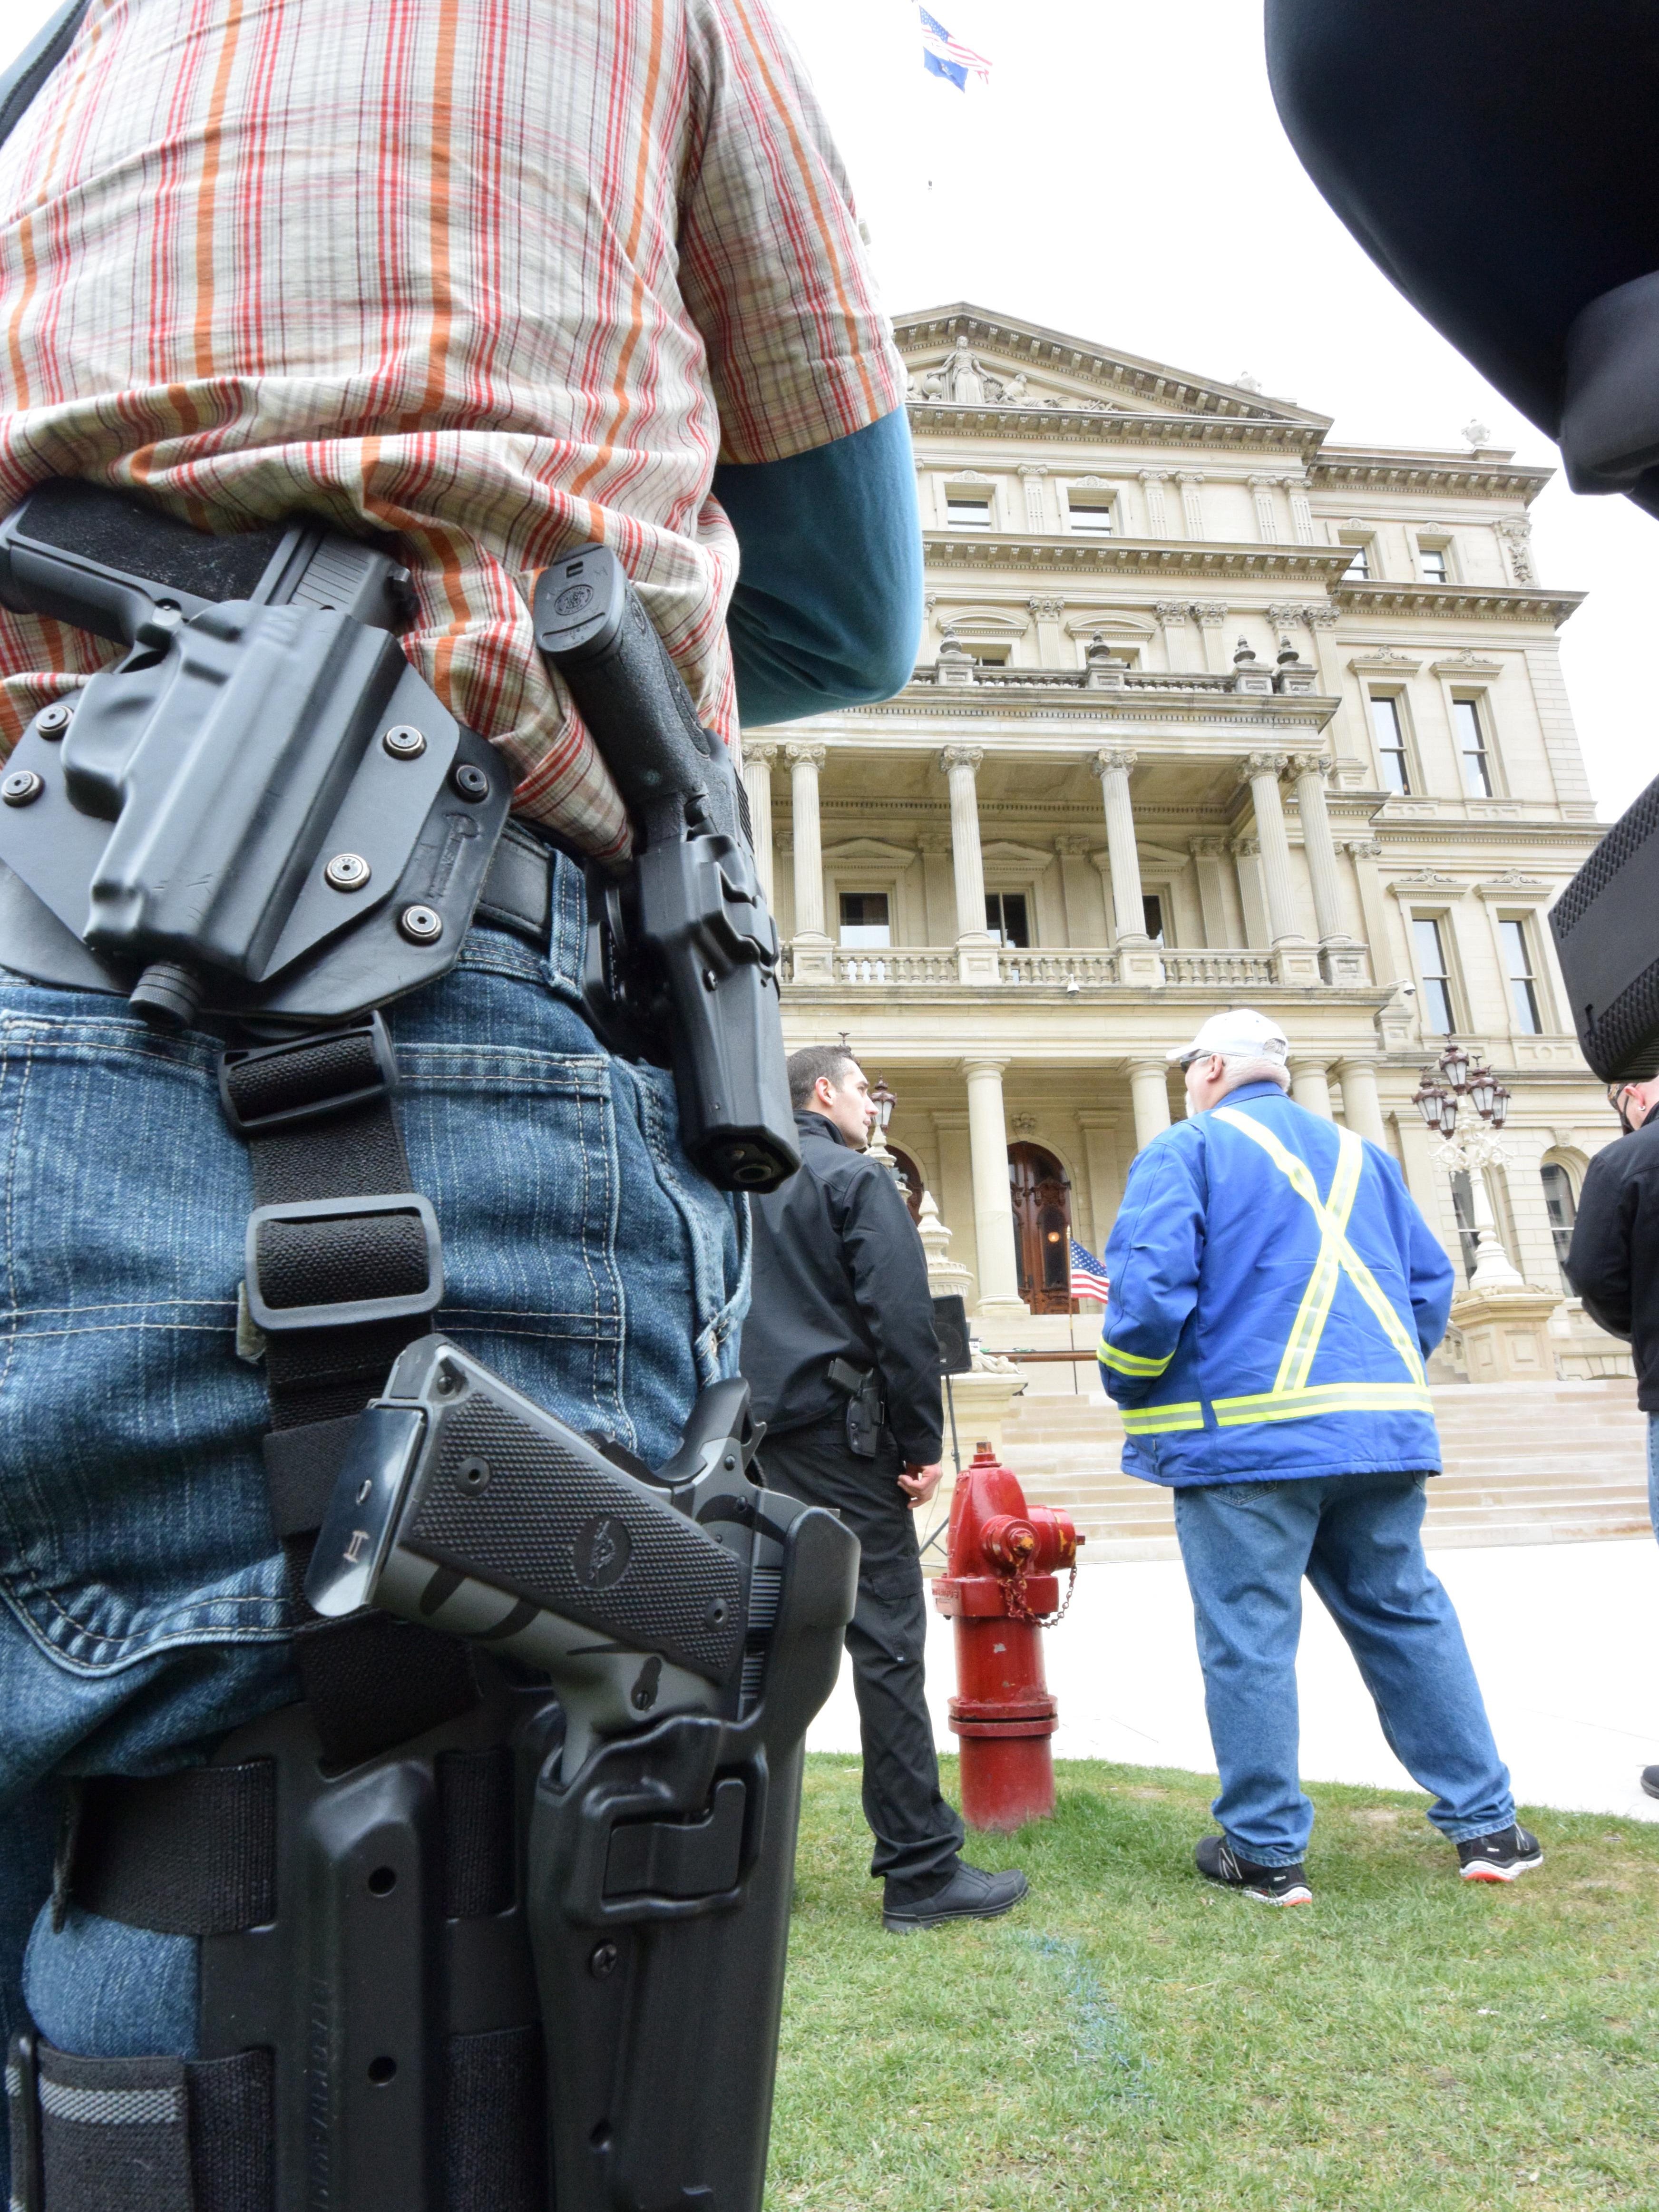 About 150 gun owners gathered on the lawn of the state Capitol on Wednesday for the annual Second Amendment March, celebrating their legal right to carry guns in the open in Michigan.